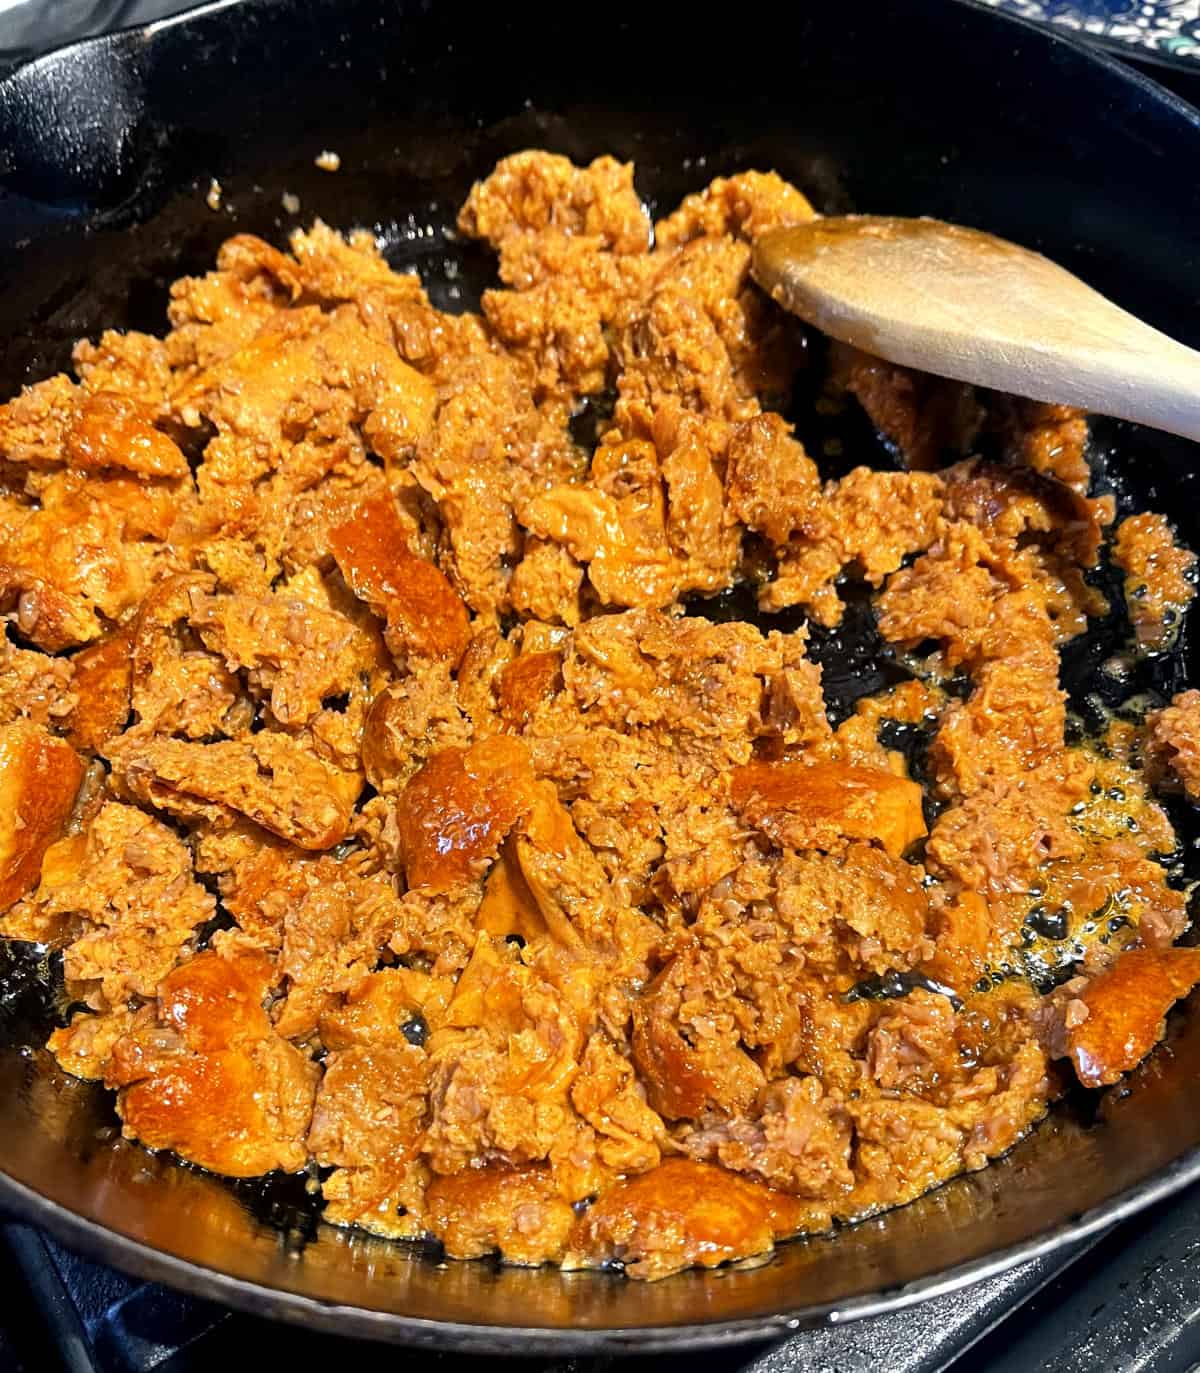 Sausage crumbled into skillet.